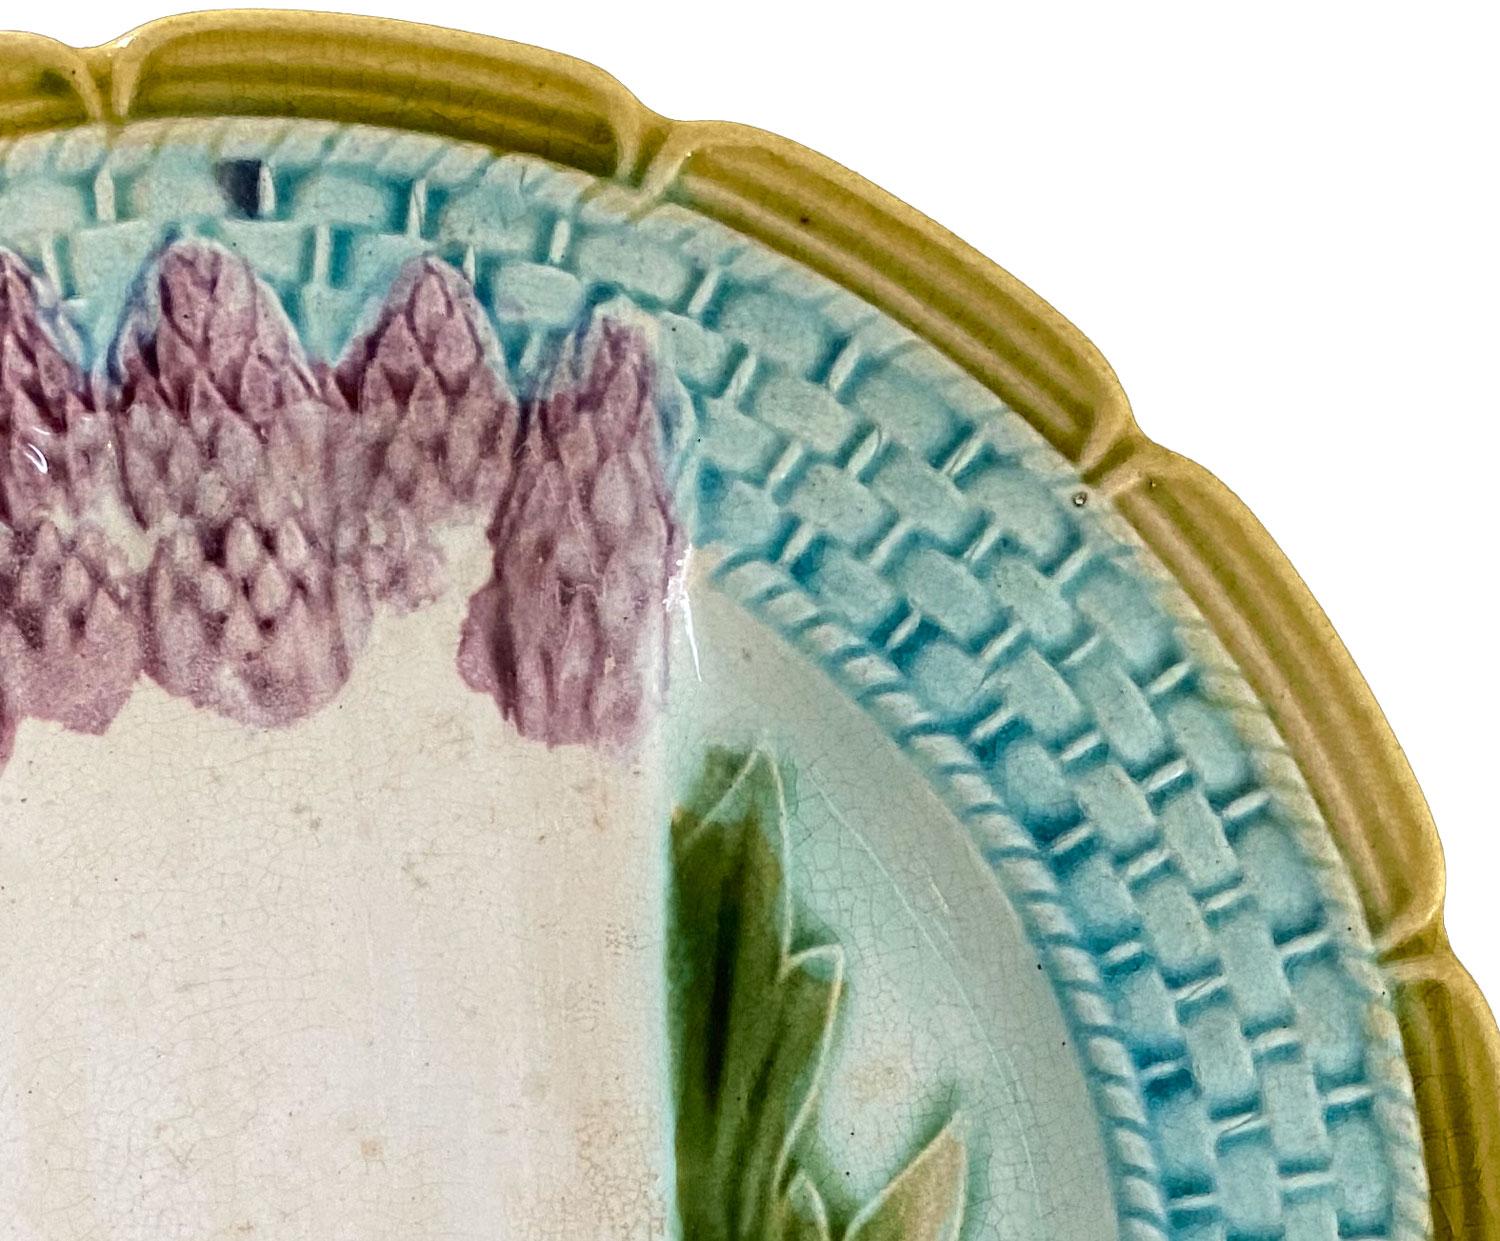 This 19th-century Majolica asparagus hand-painted plate was made in France. Asparagus plate in barbotine - slip decorated with colored asparagus in the middle part, wicker style texture on the lip and a scalloped yellow rim. Work by the Orchies